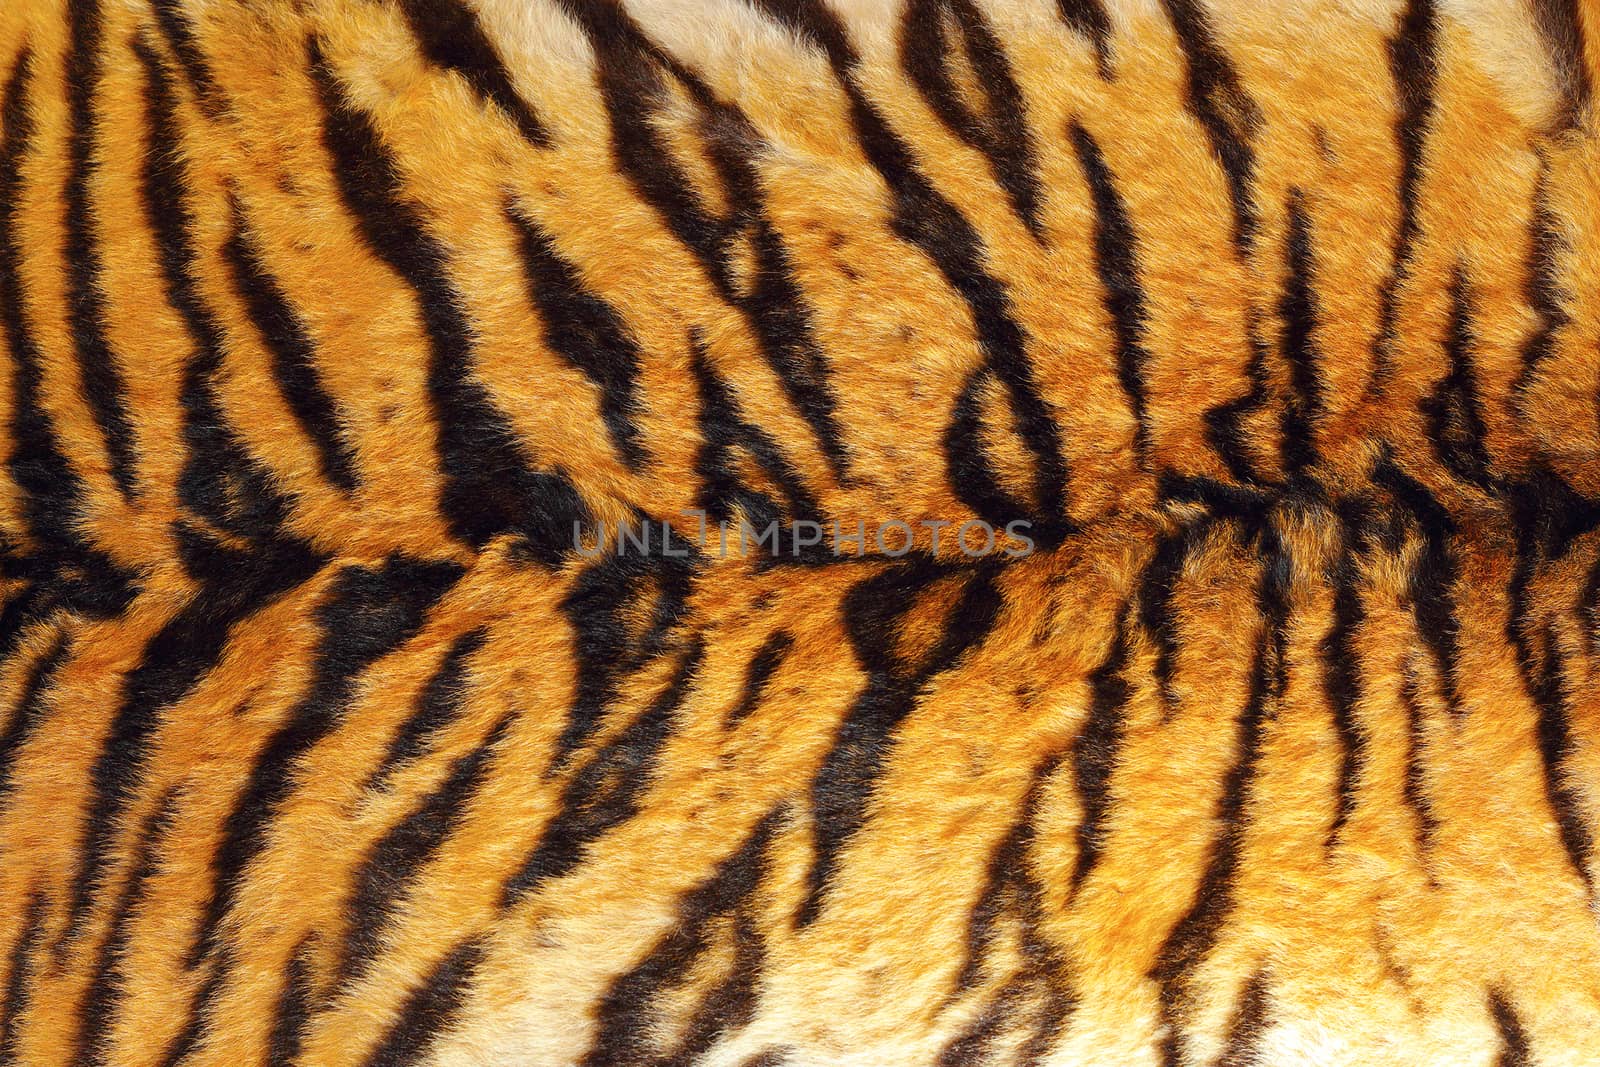 detail of tiger stripes on wild animal leather, natural texture of fur